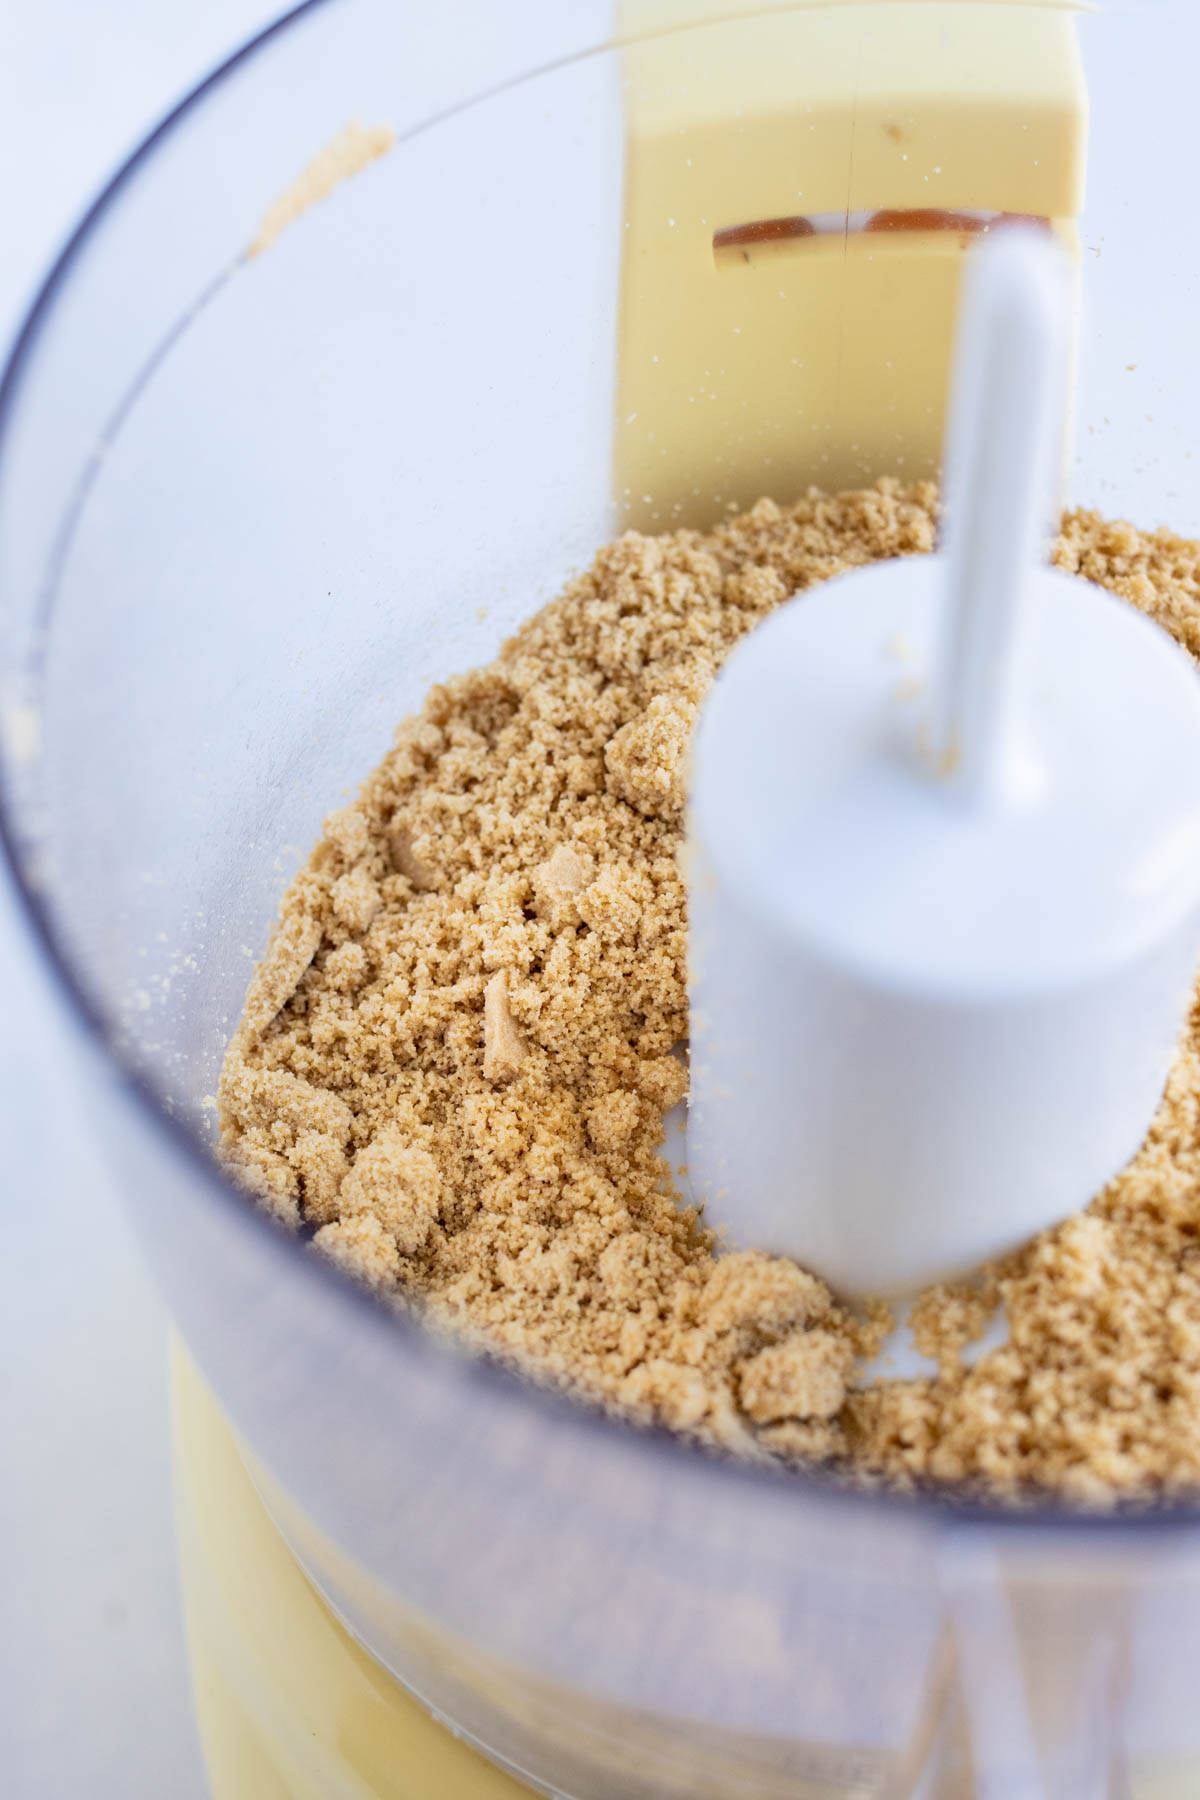 Graham crackers are crushed in a food processor.